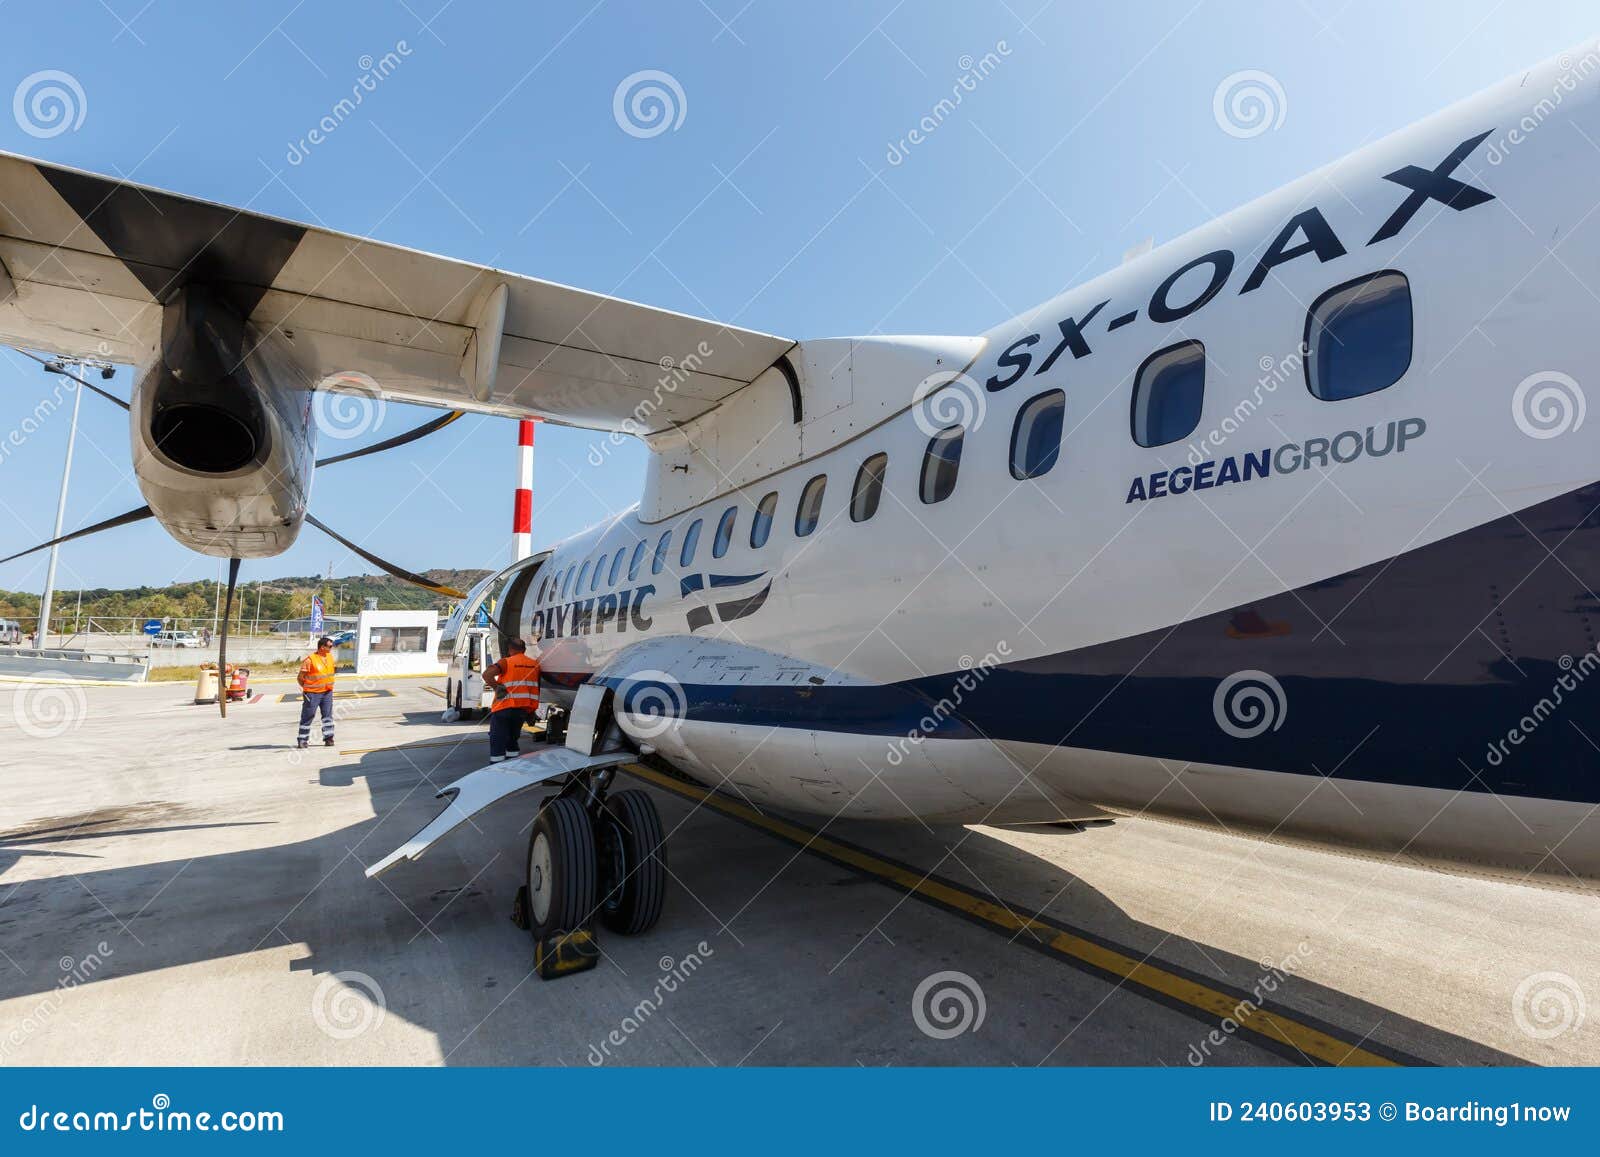 184 Airline Photos - Free & Royalty-Free Stock Photos from Dreamstime